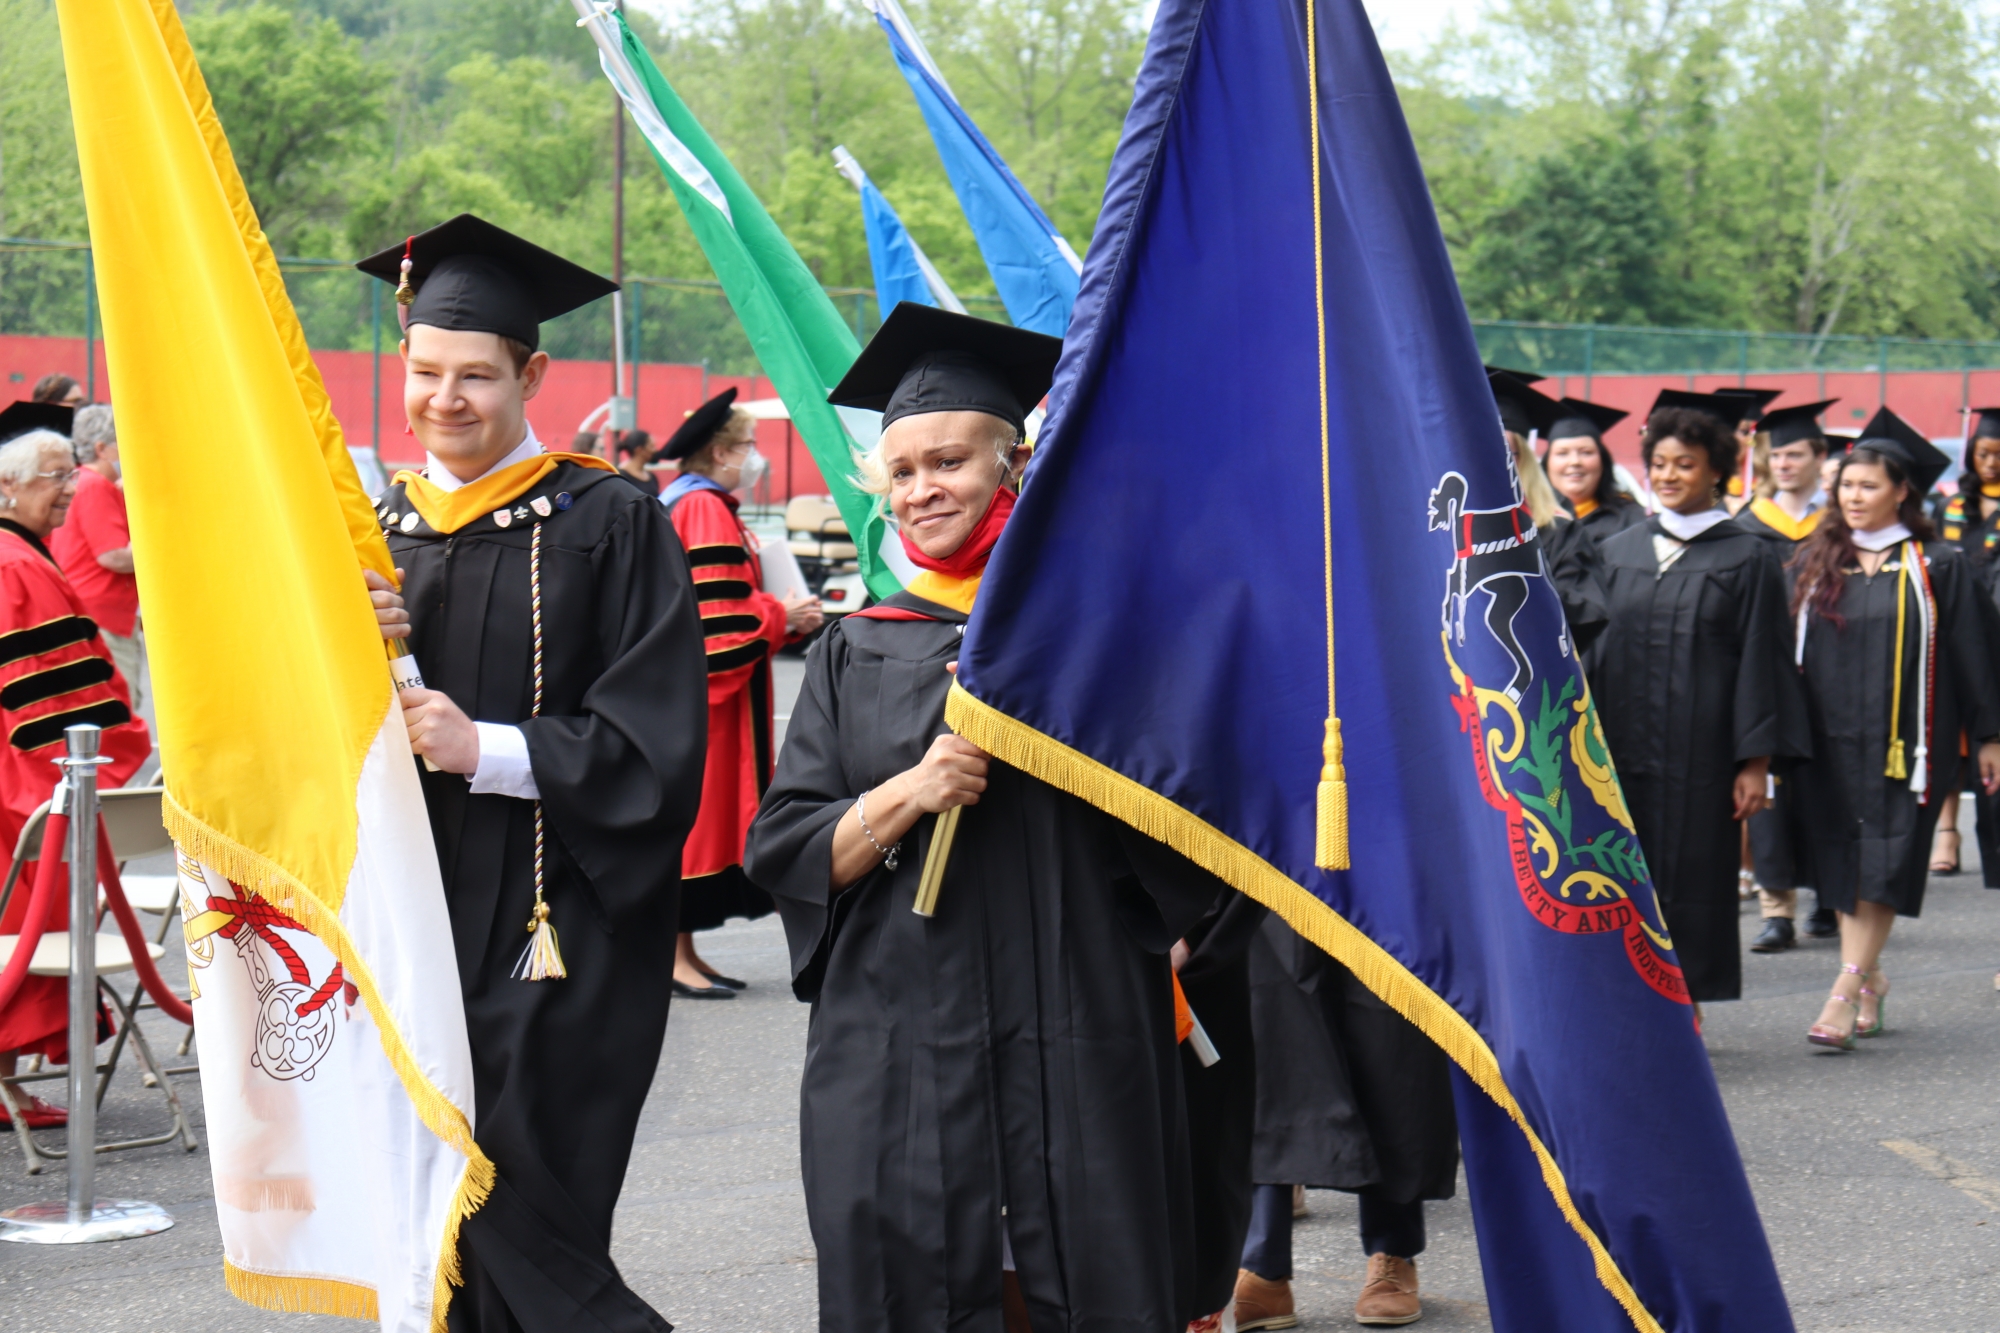 Students carrying the Papal flag and State flag of Pennsylvania helped lead the procession for the Commencement Ceremony for the Class of 2020 and 2021.